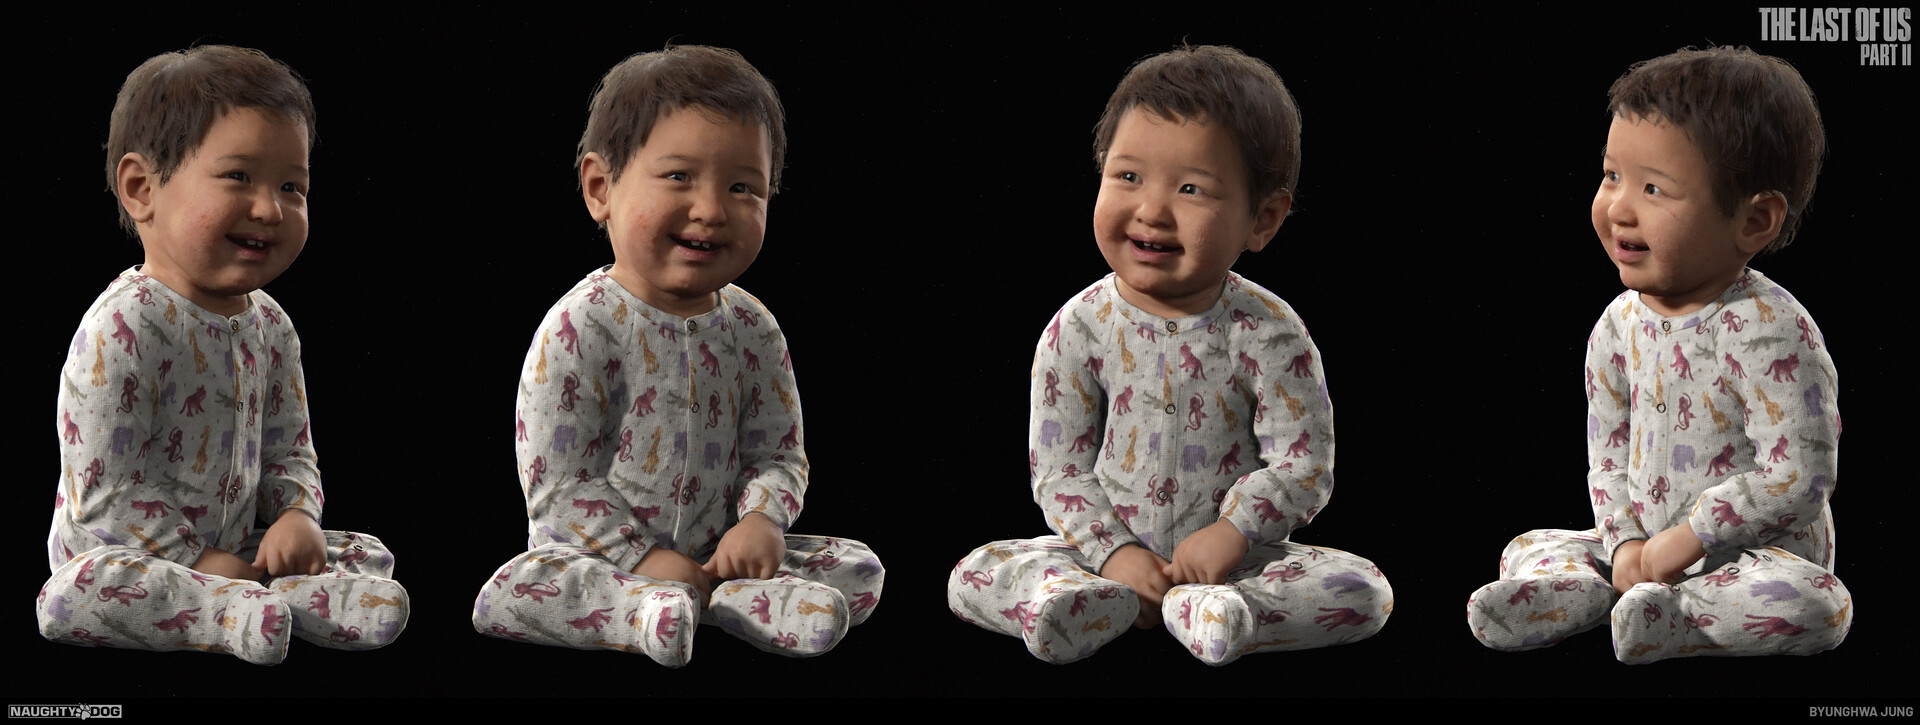 The Last Of Us Part II Has A Very Good Baby